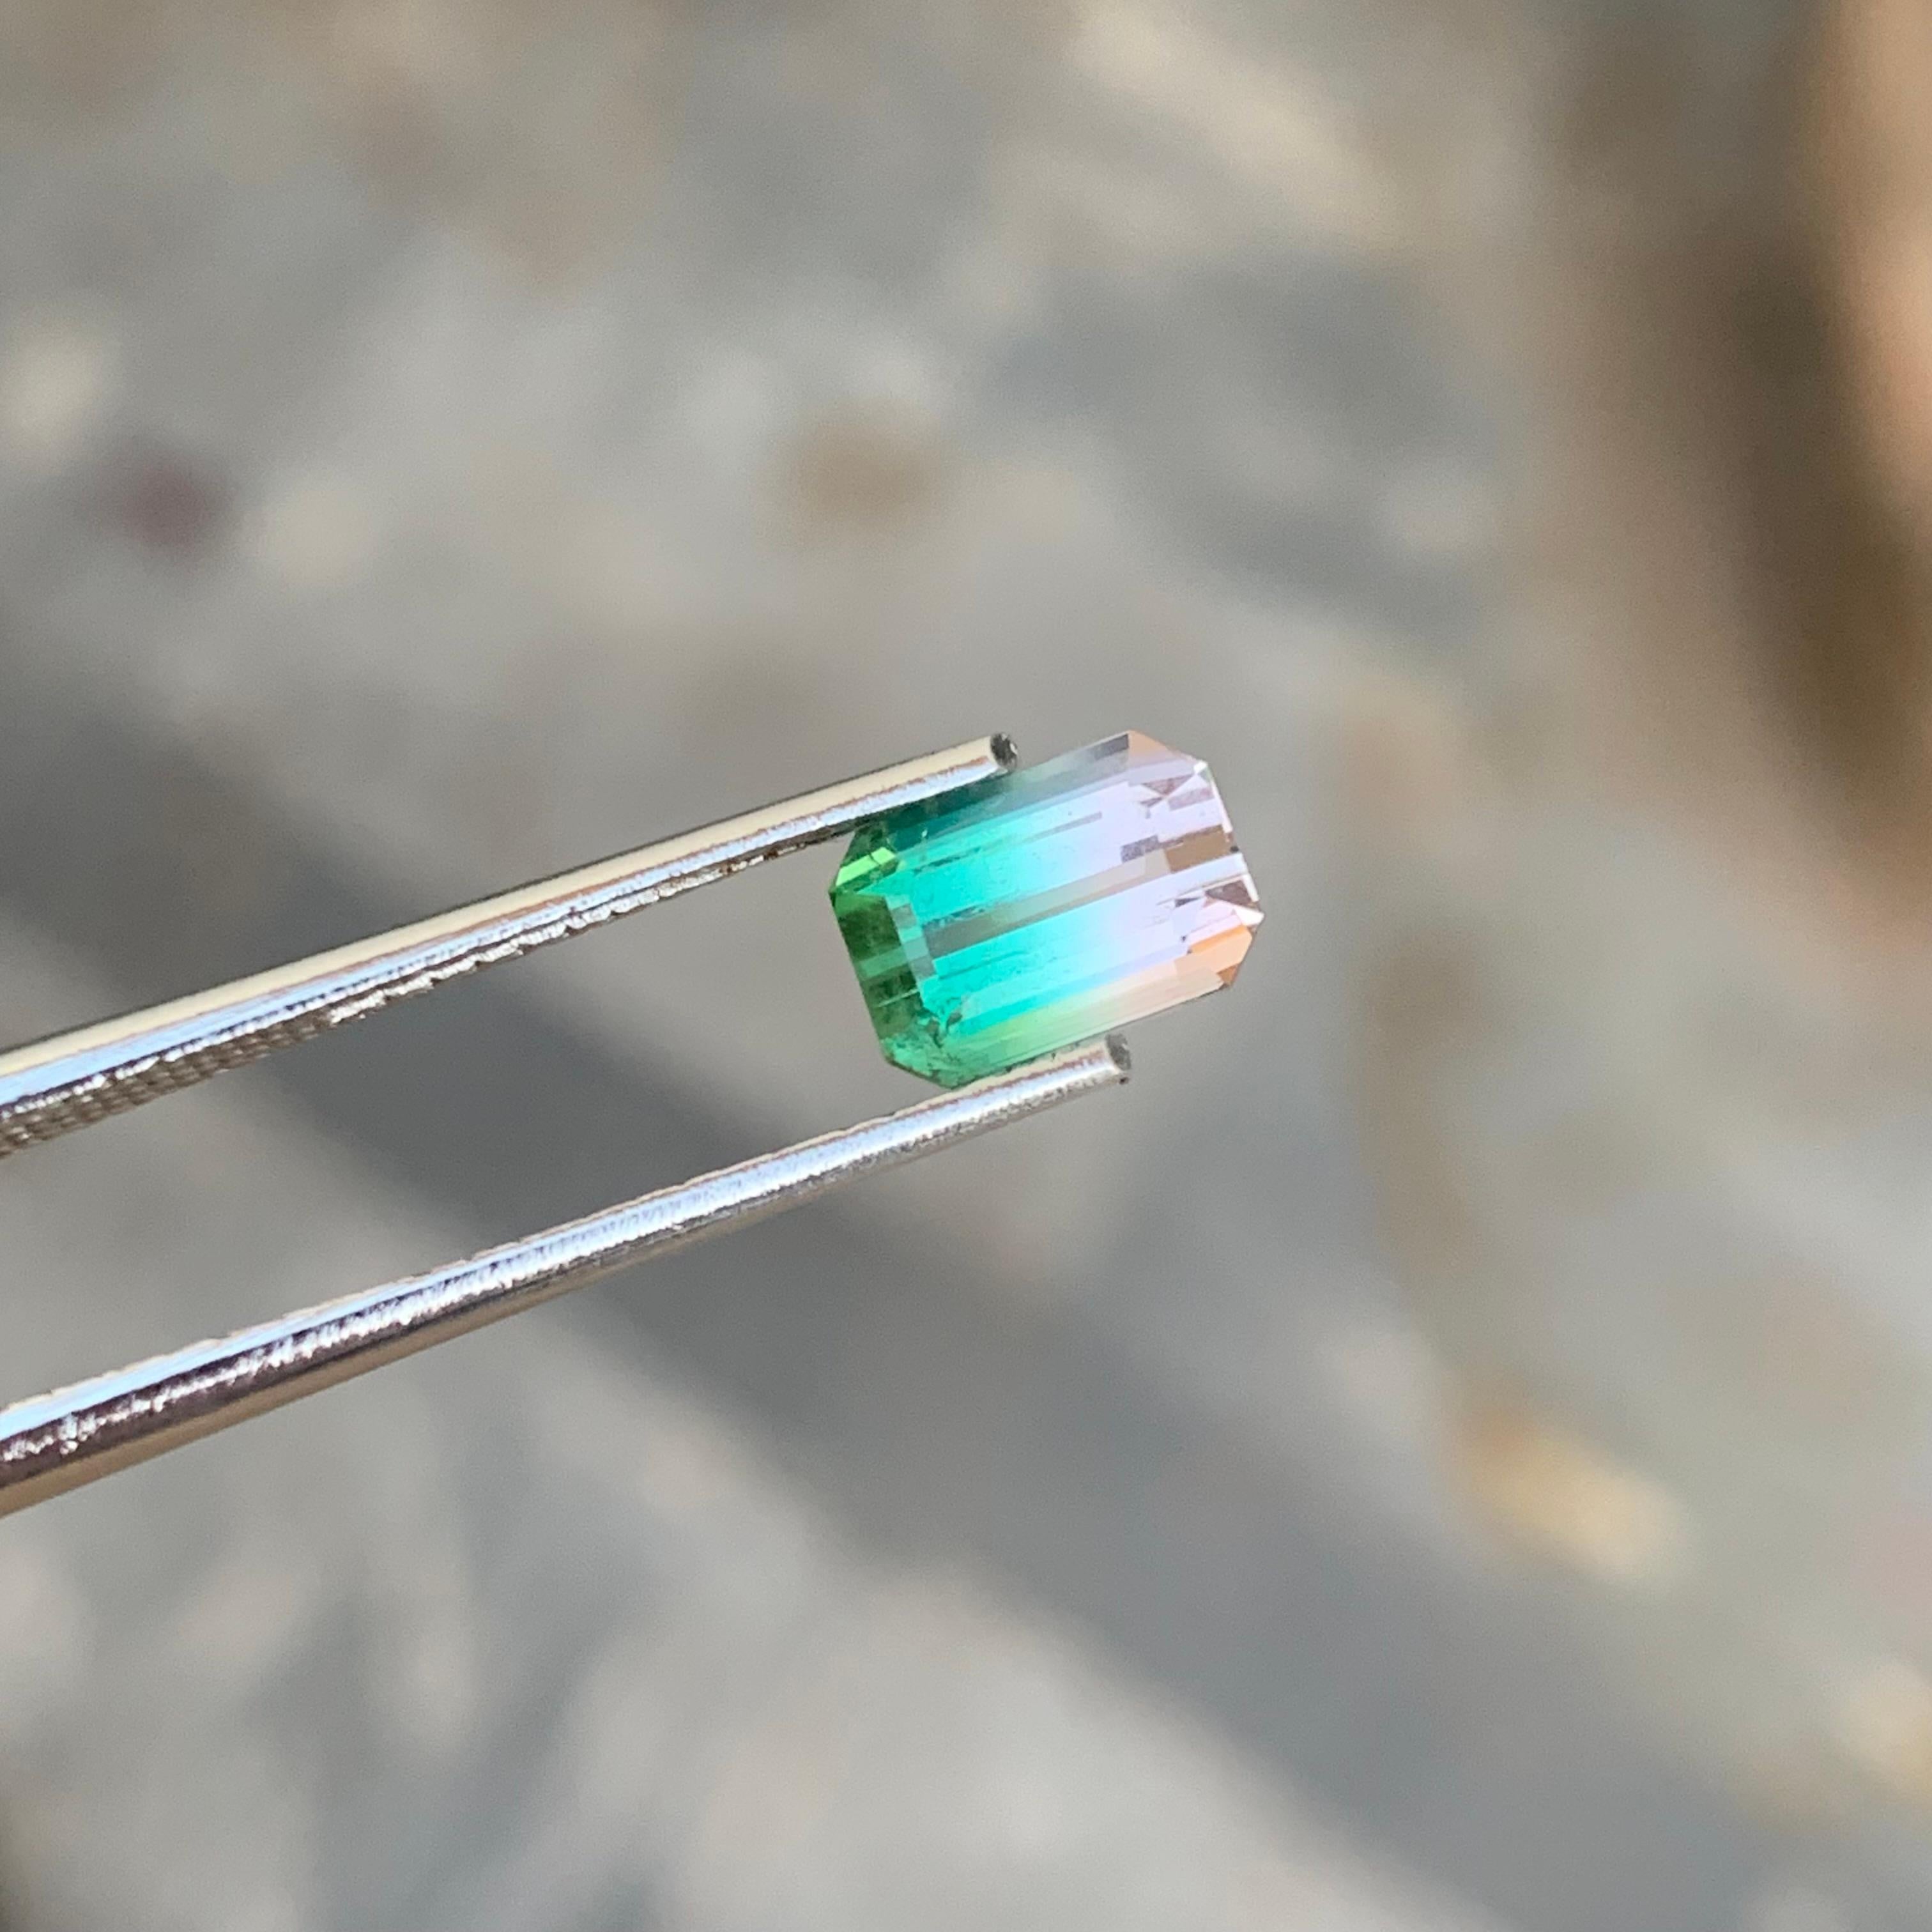 Faceted Bicolor Tourmaline
Weight: 1.60 Carats
Dimension: 7.5x5.2x4.5 Mm
Origin: Afghanistan
Color: Green & Pink
Shape: Emerald Cut
Quality: AAA 
.
Bicolor tourmaline is connected to the heart chakra, which makes it good for cleansing and removing